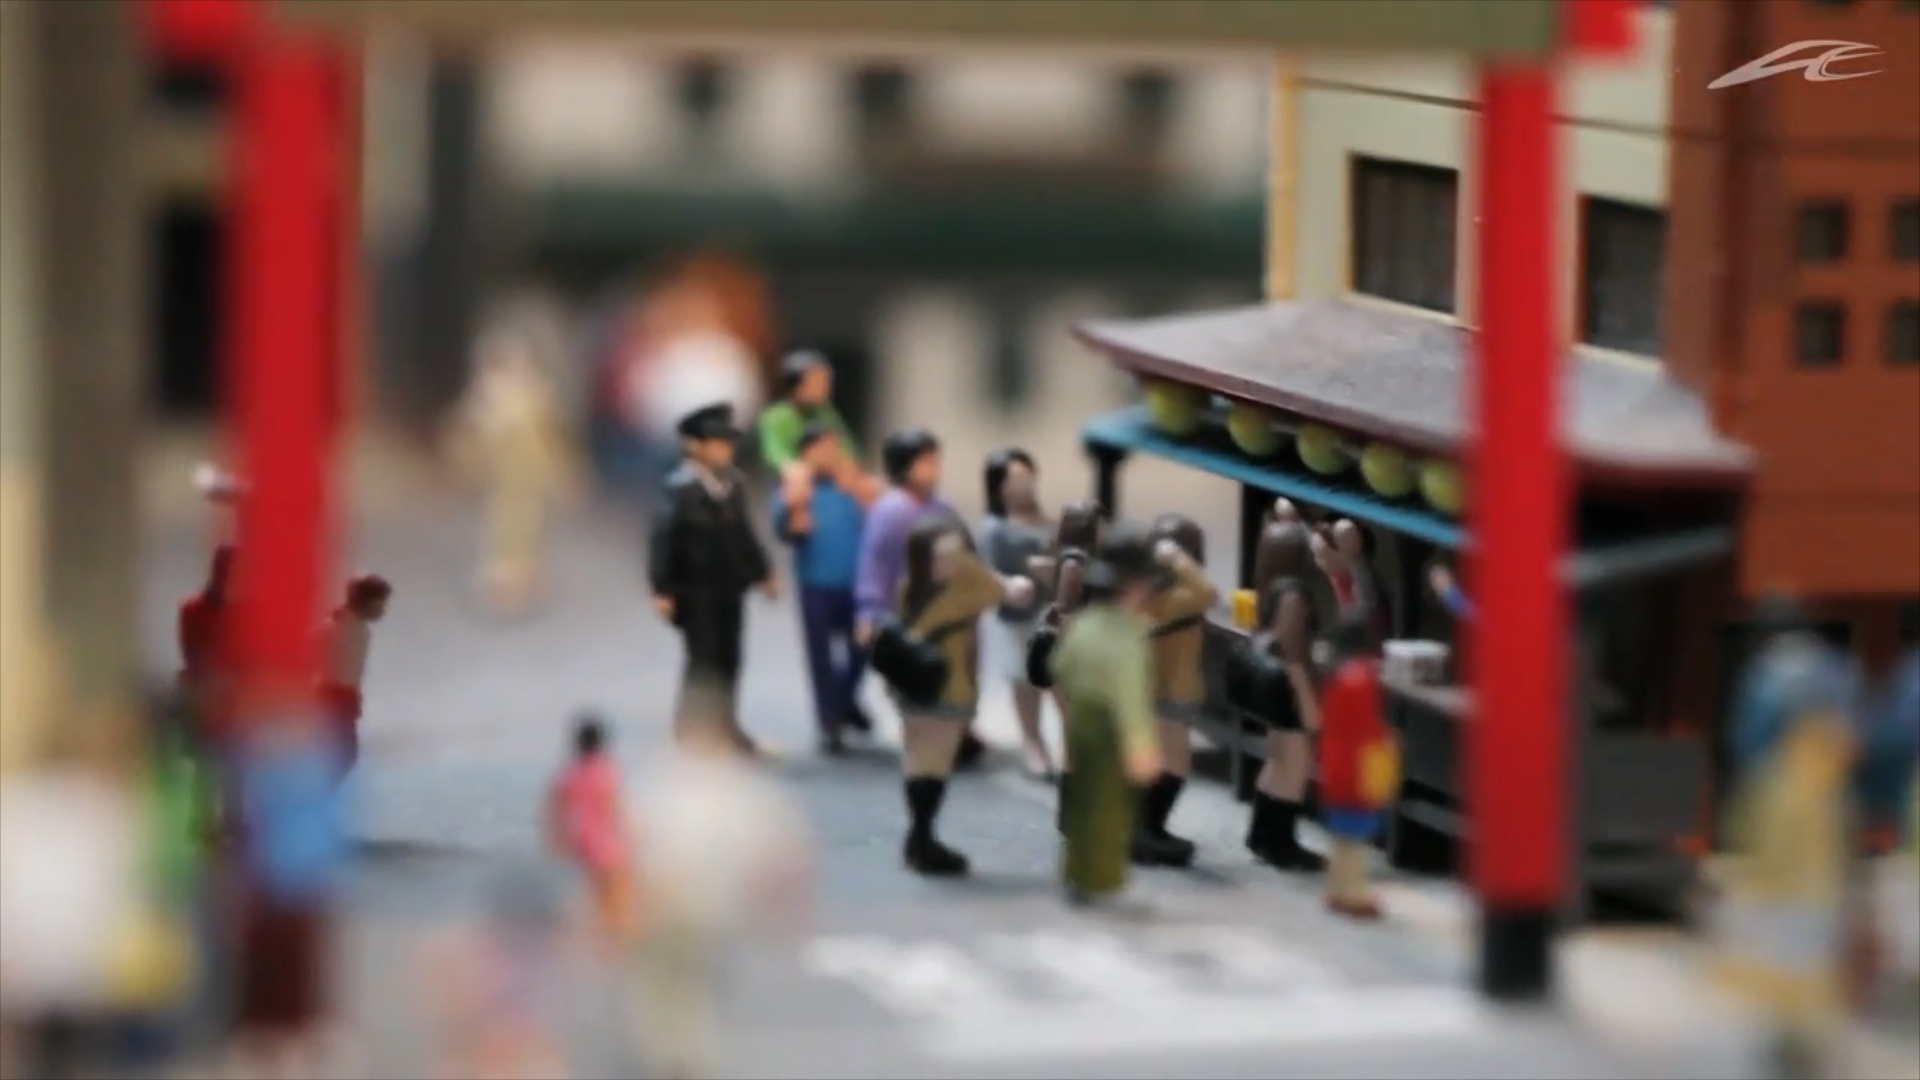 Talk of the Town: The Grandiose Diorama at the SCMAGLEV and Railway Park Museum